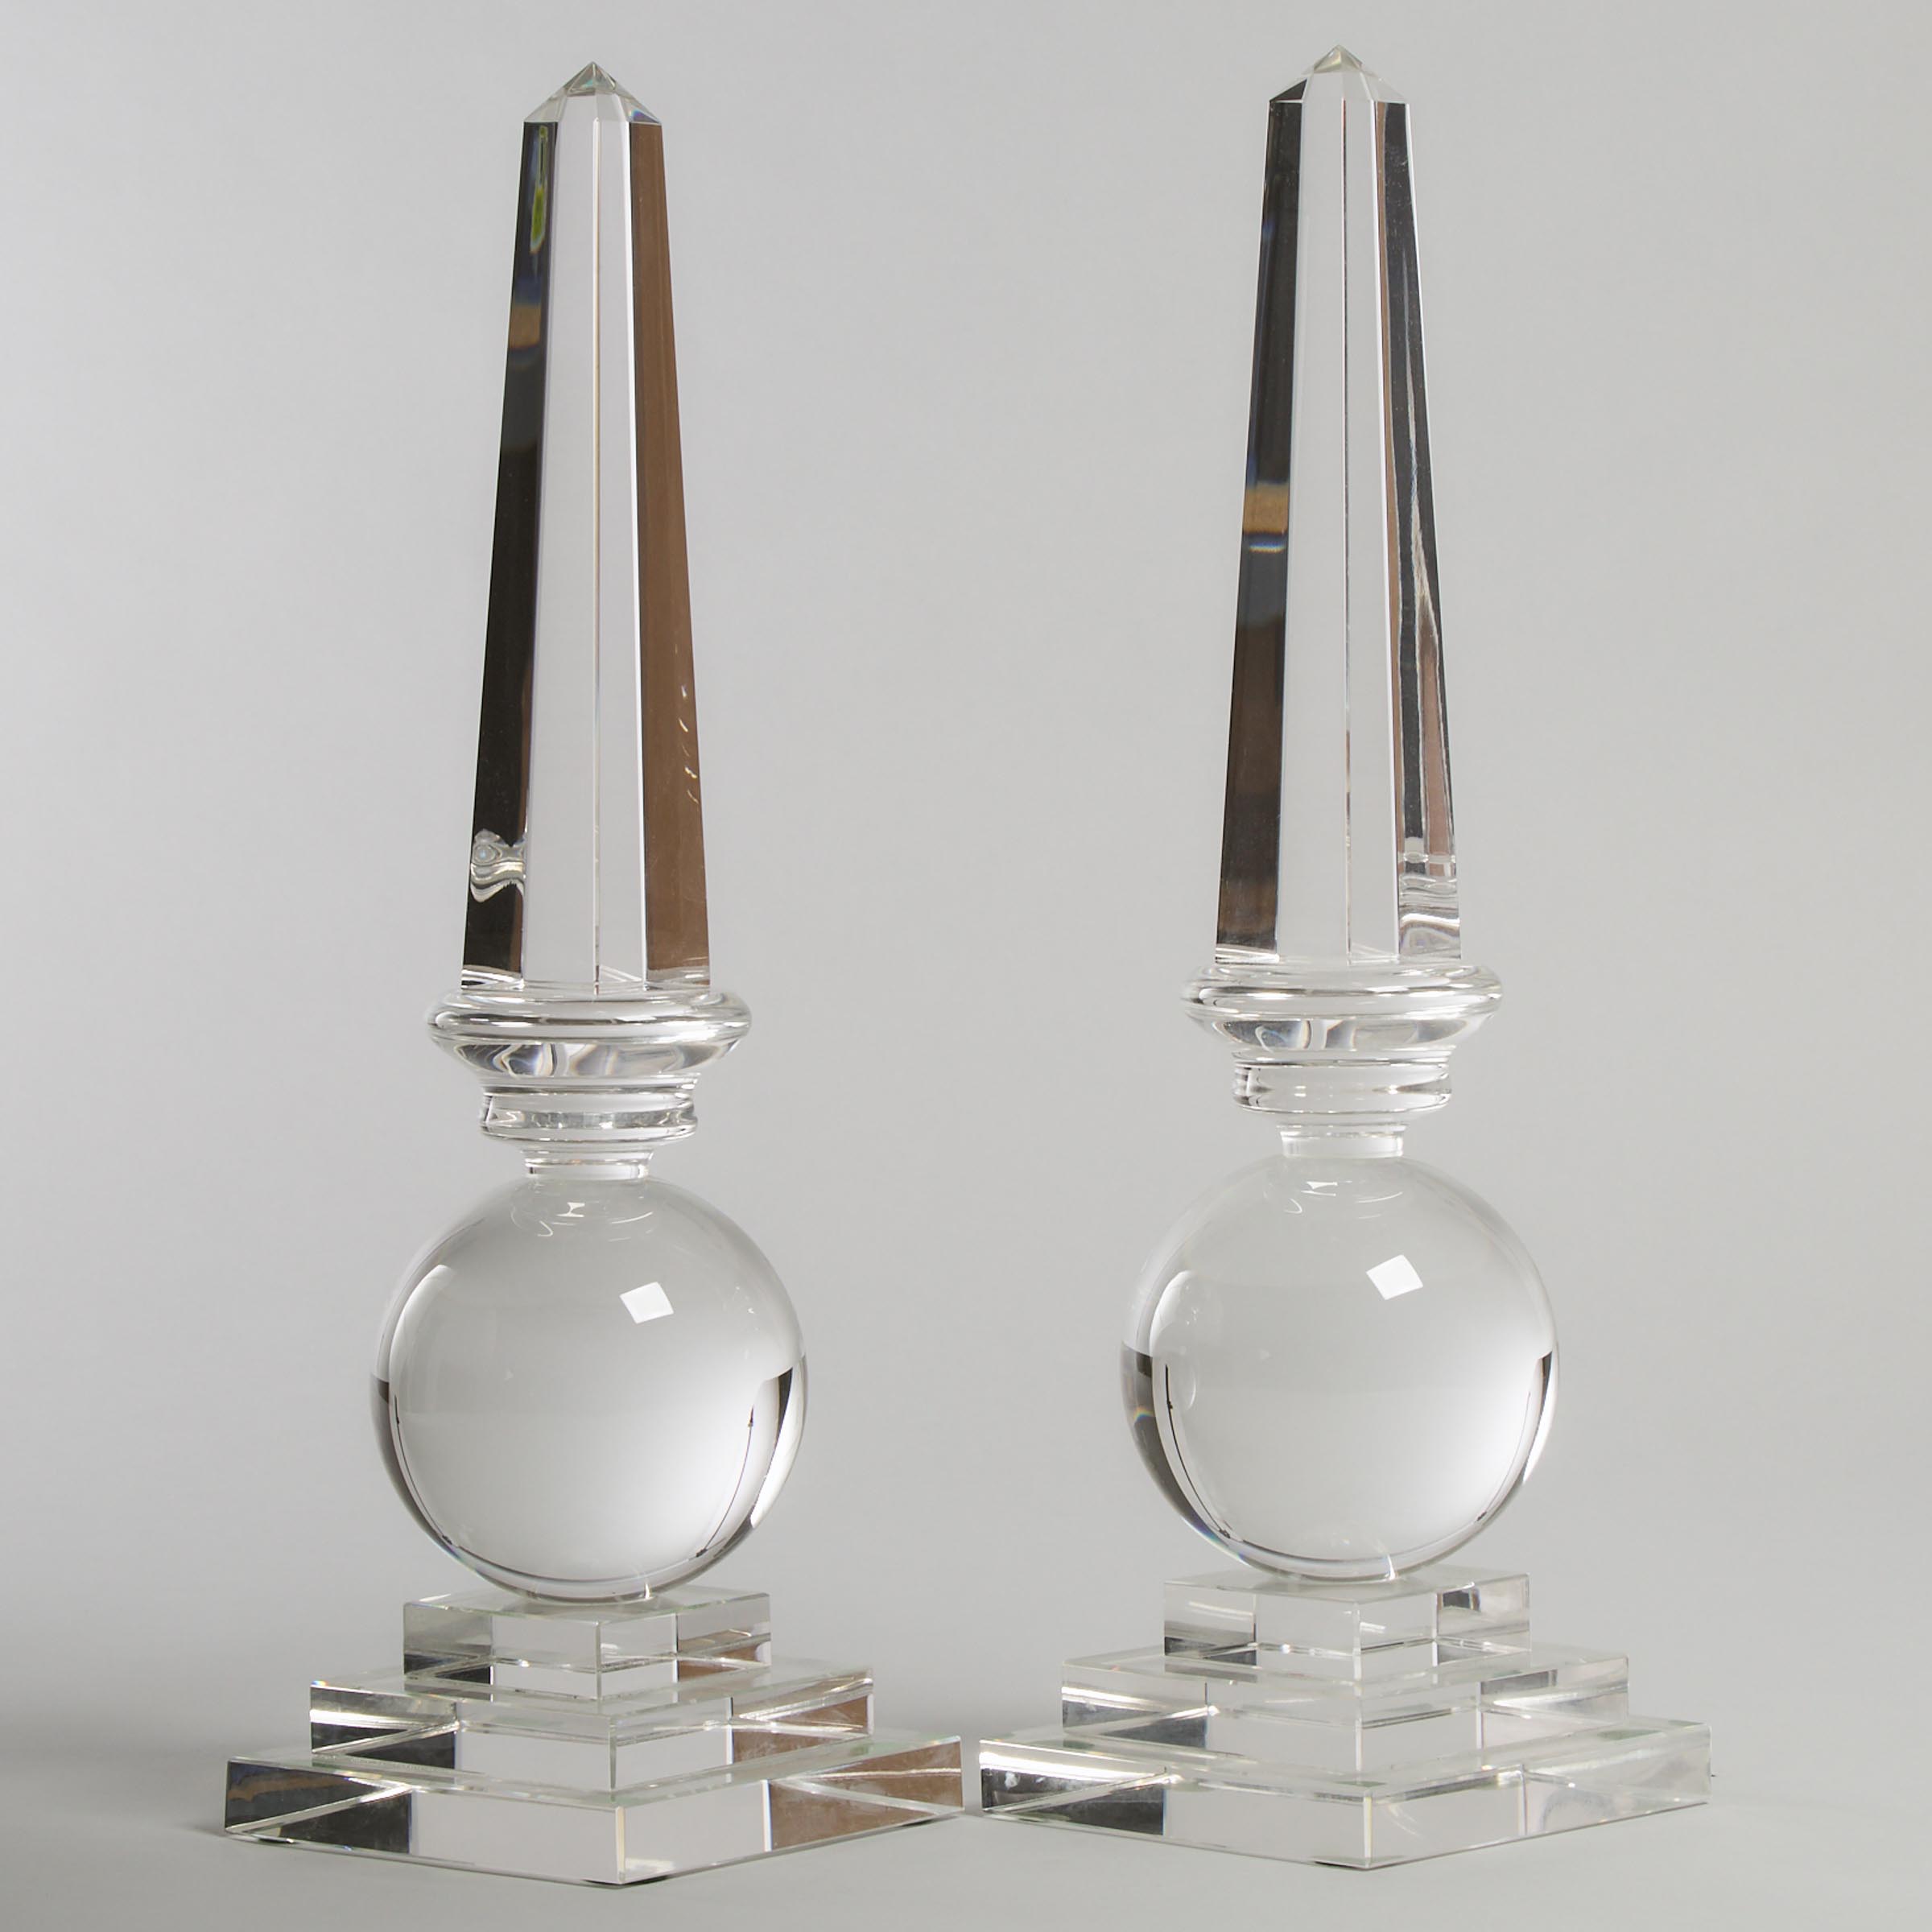 Pair of Contemporary Moulded and Cut Glass Obelisks, late 20th century